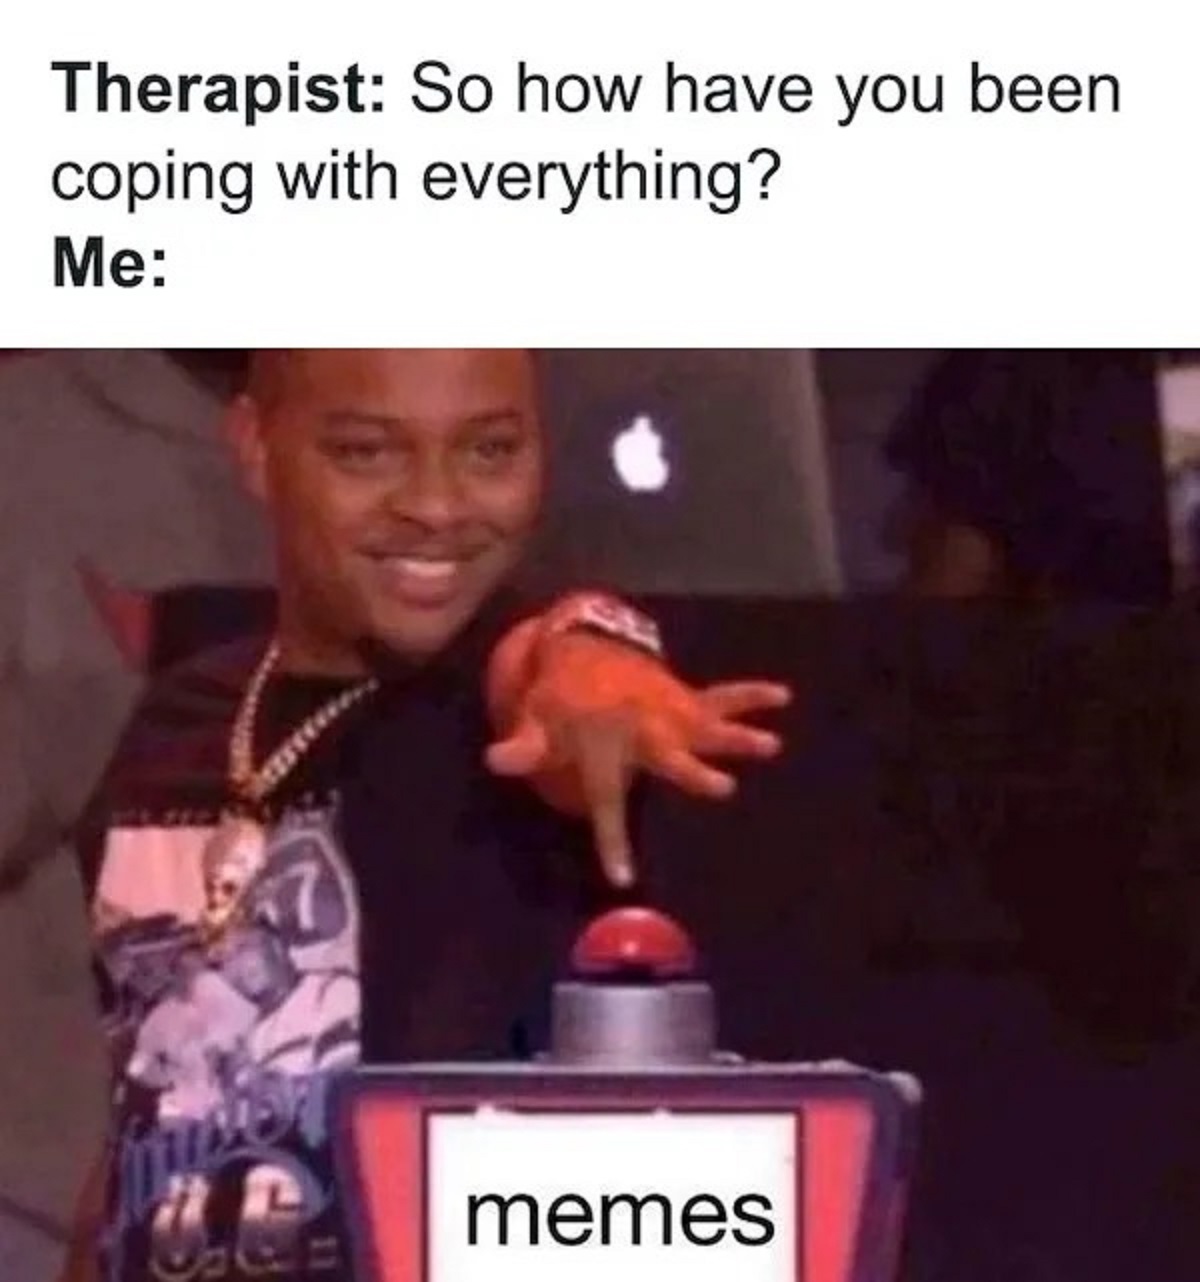 photo caption - Therapist So how have you been coping with everything? Me 30 memes Su